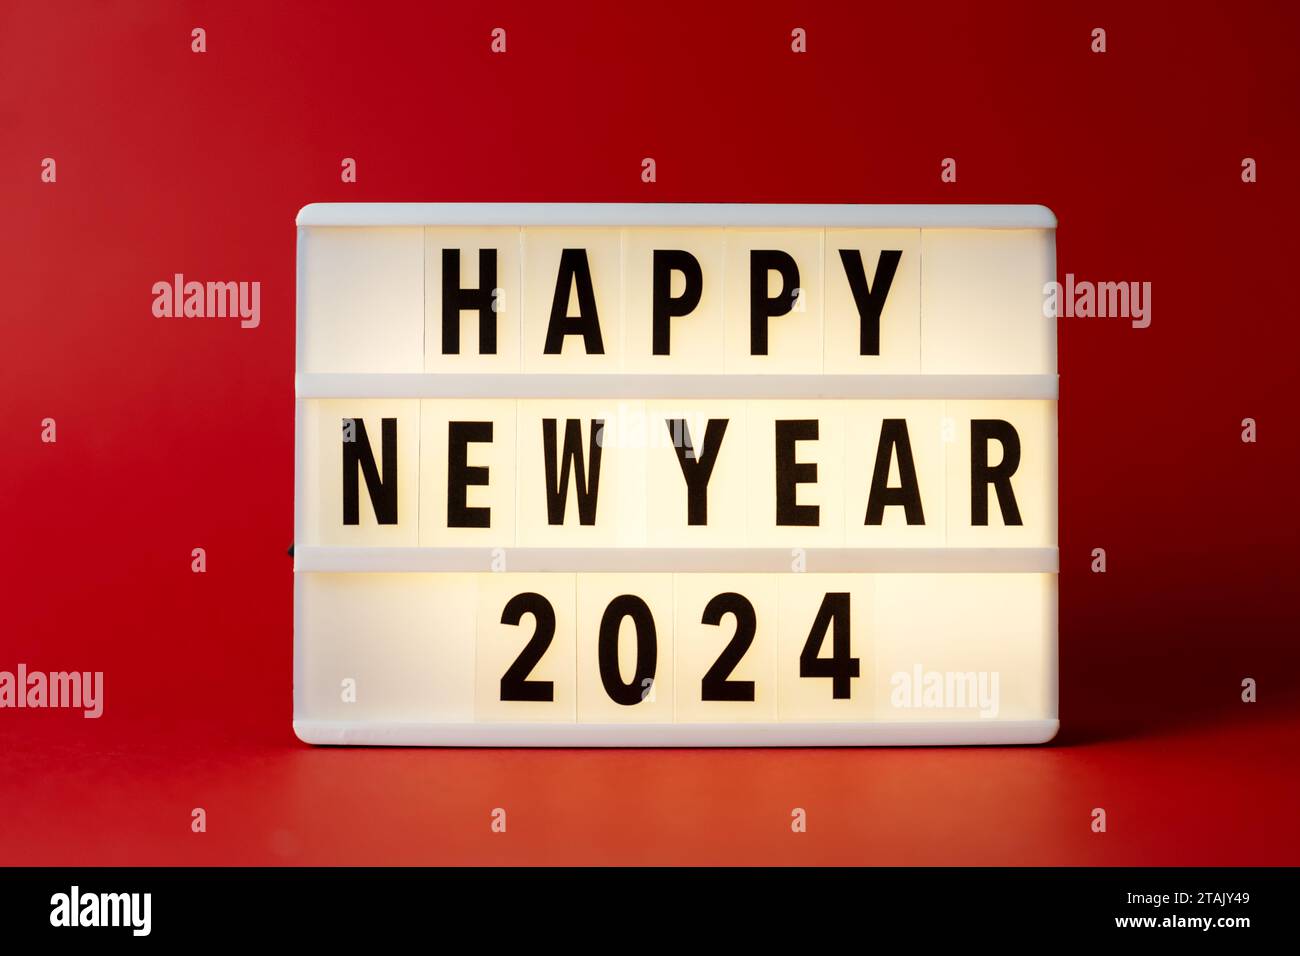 Happy New Year 2024 on Light box Red Background Stock Photo